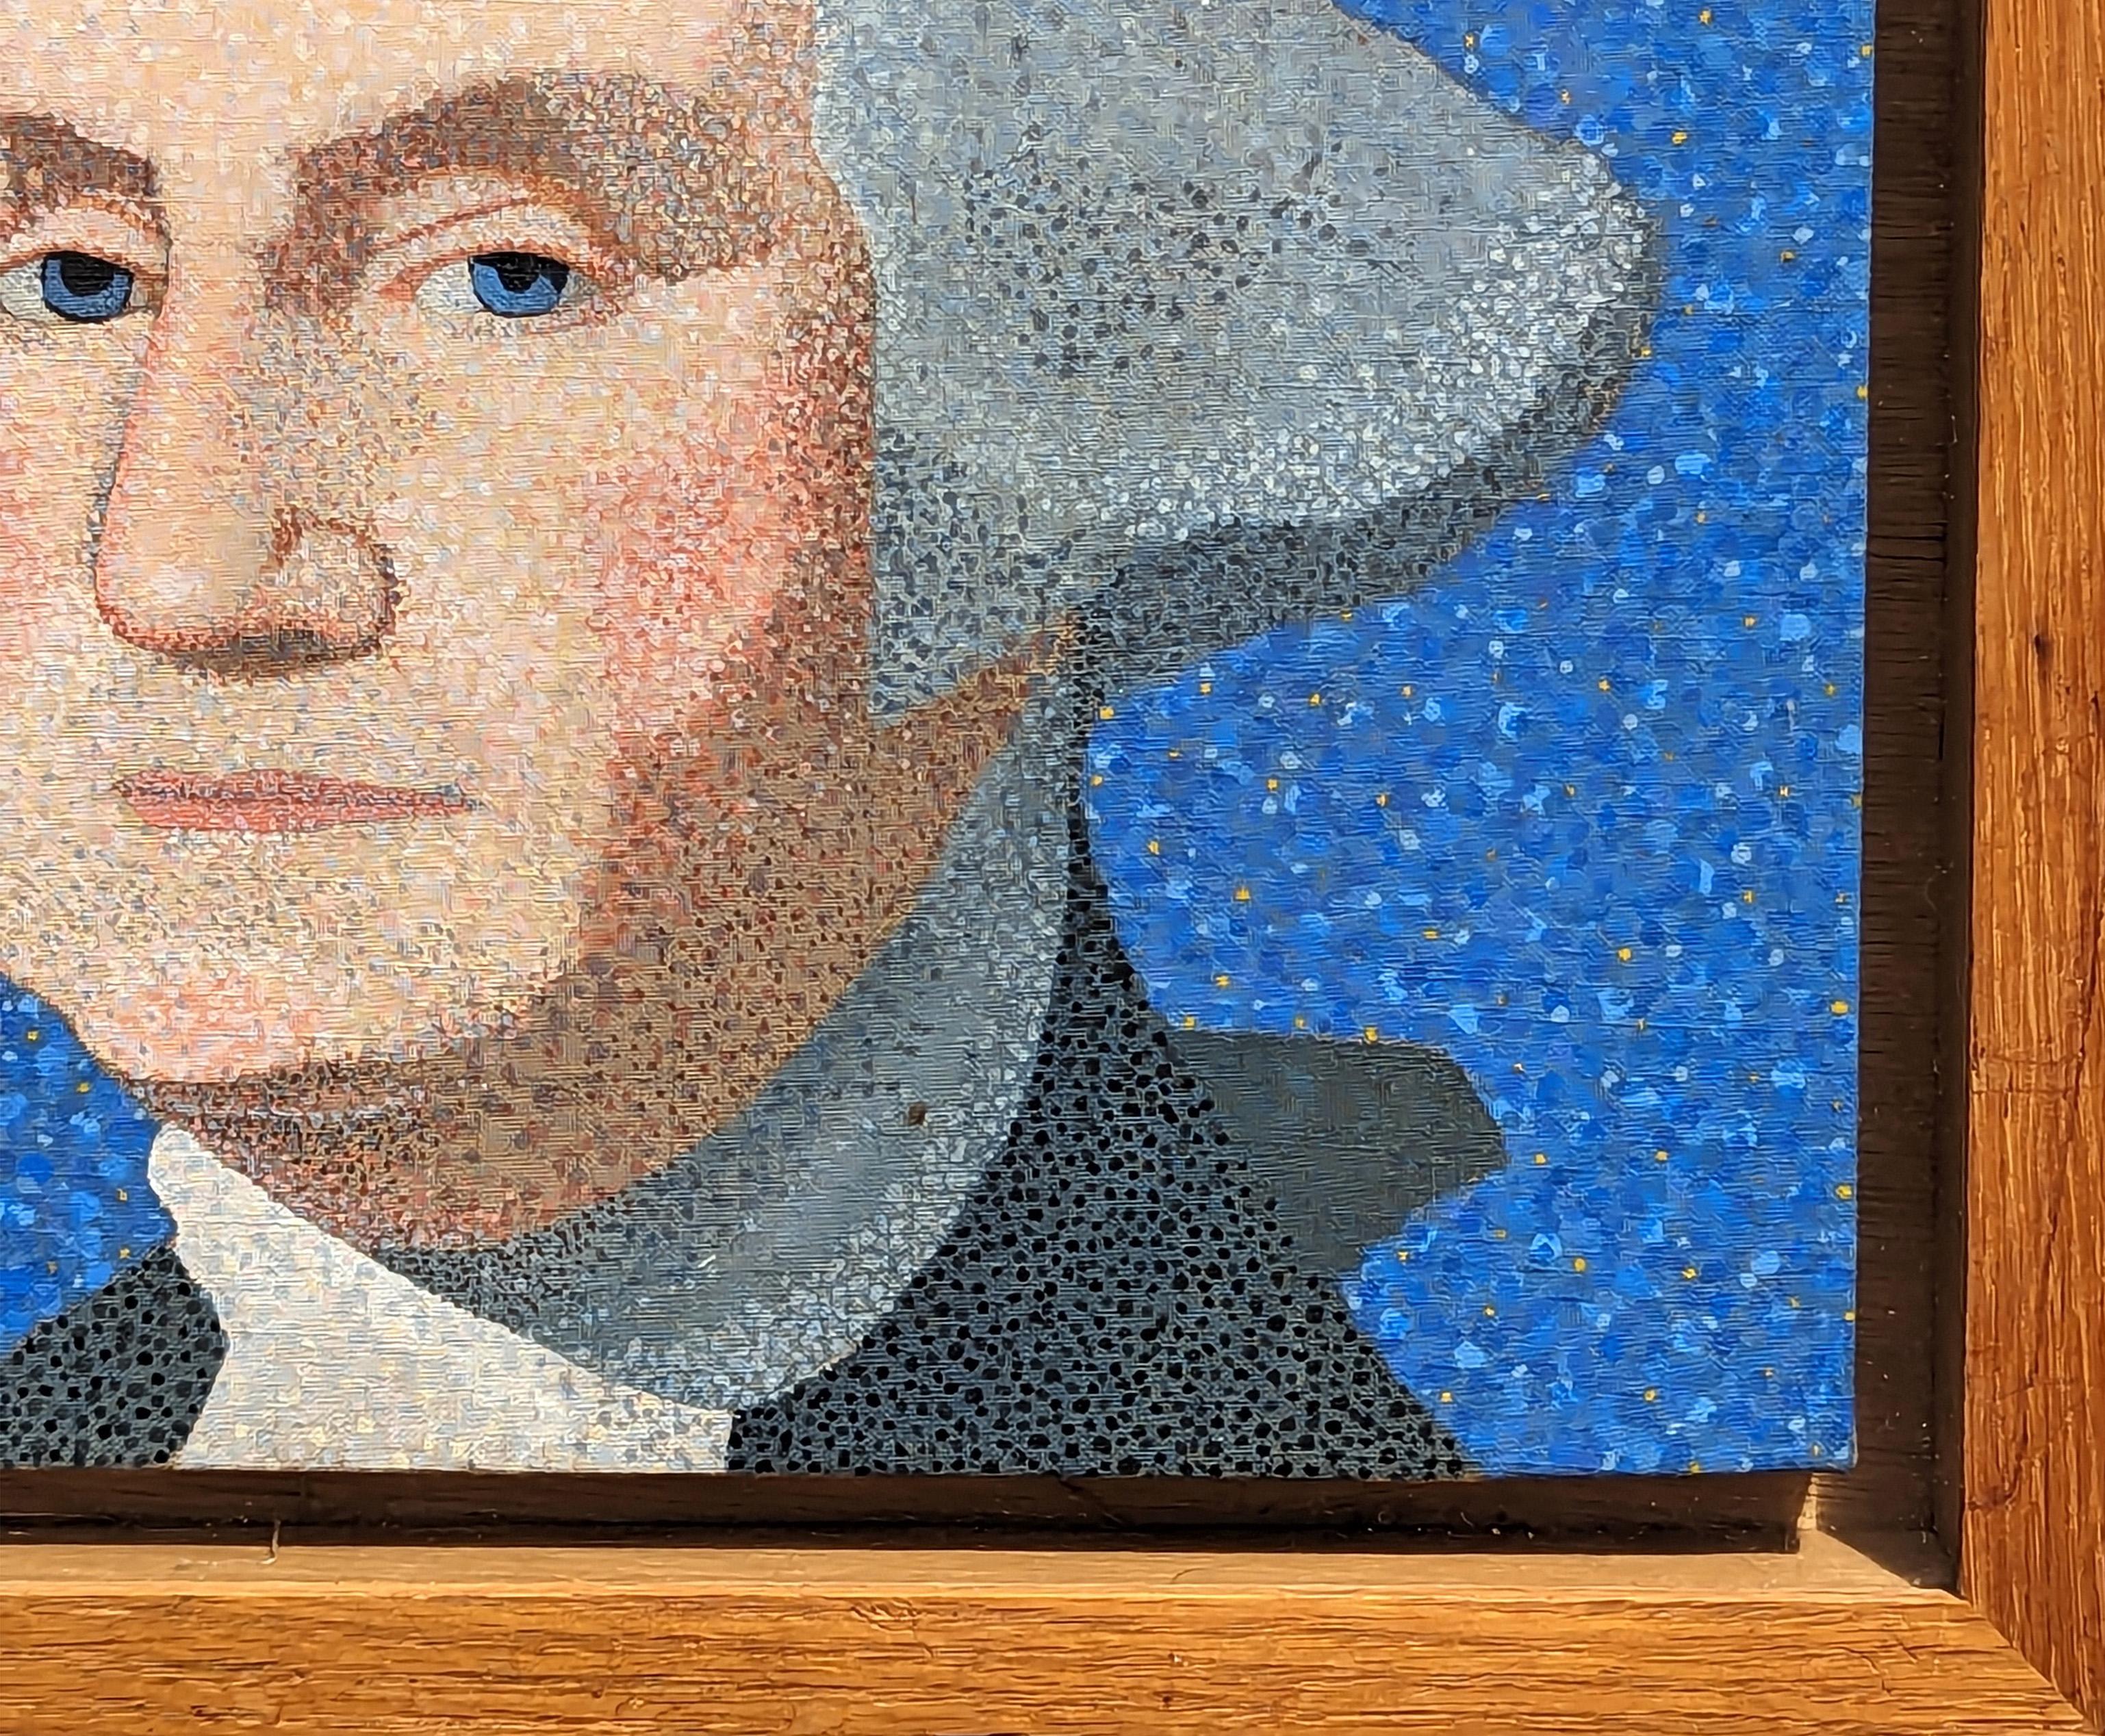 Modern portrait of George Washington by Texas born artist Clark Fox. The work features an intricate depiction of the former president using pointillism, the practice of applying small strokes or dots of color to a surface so that from a distance